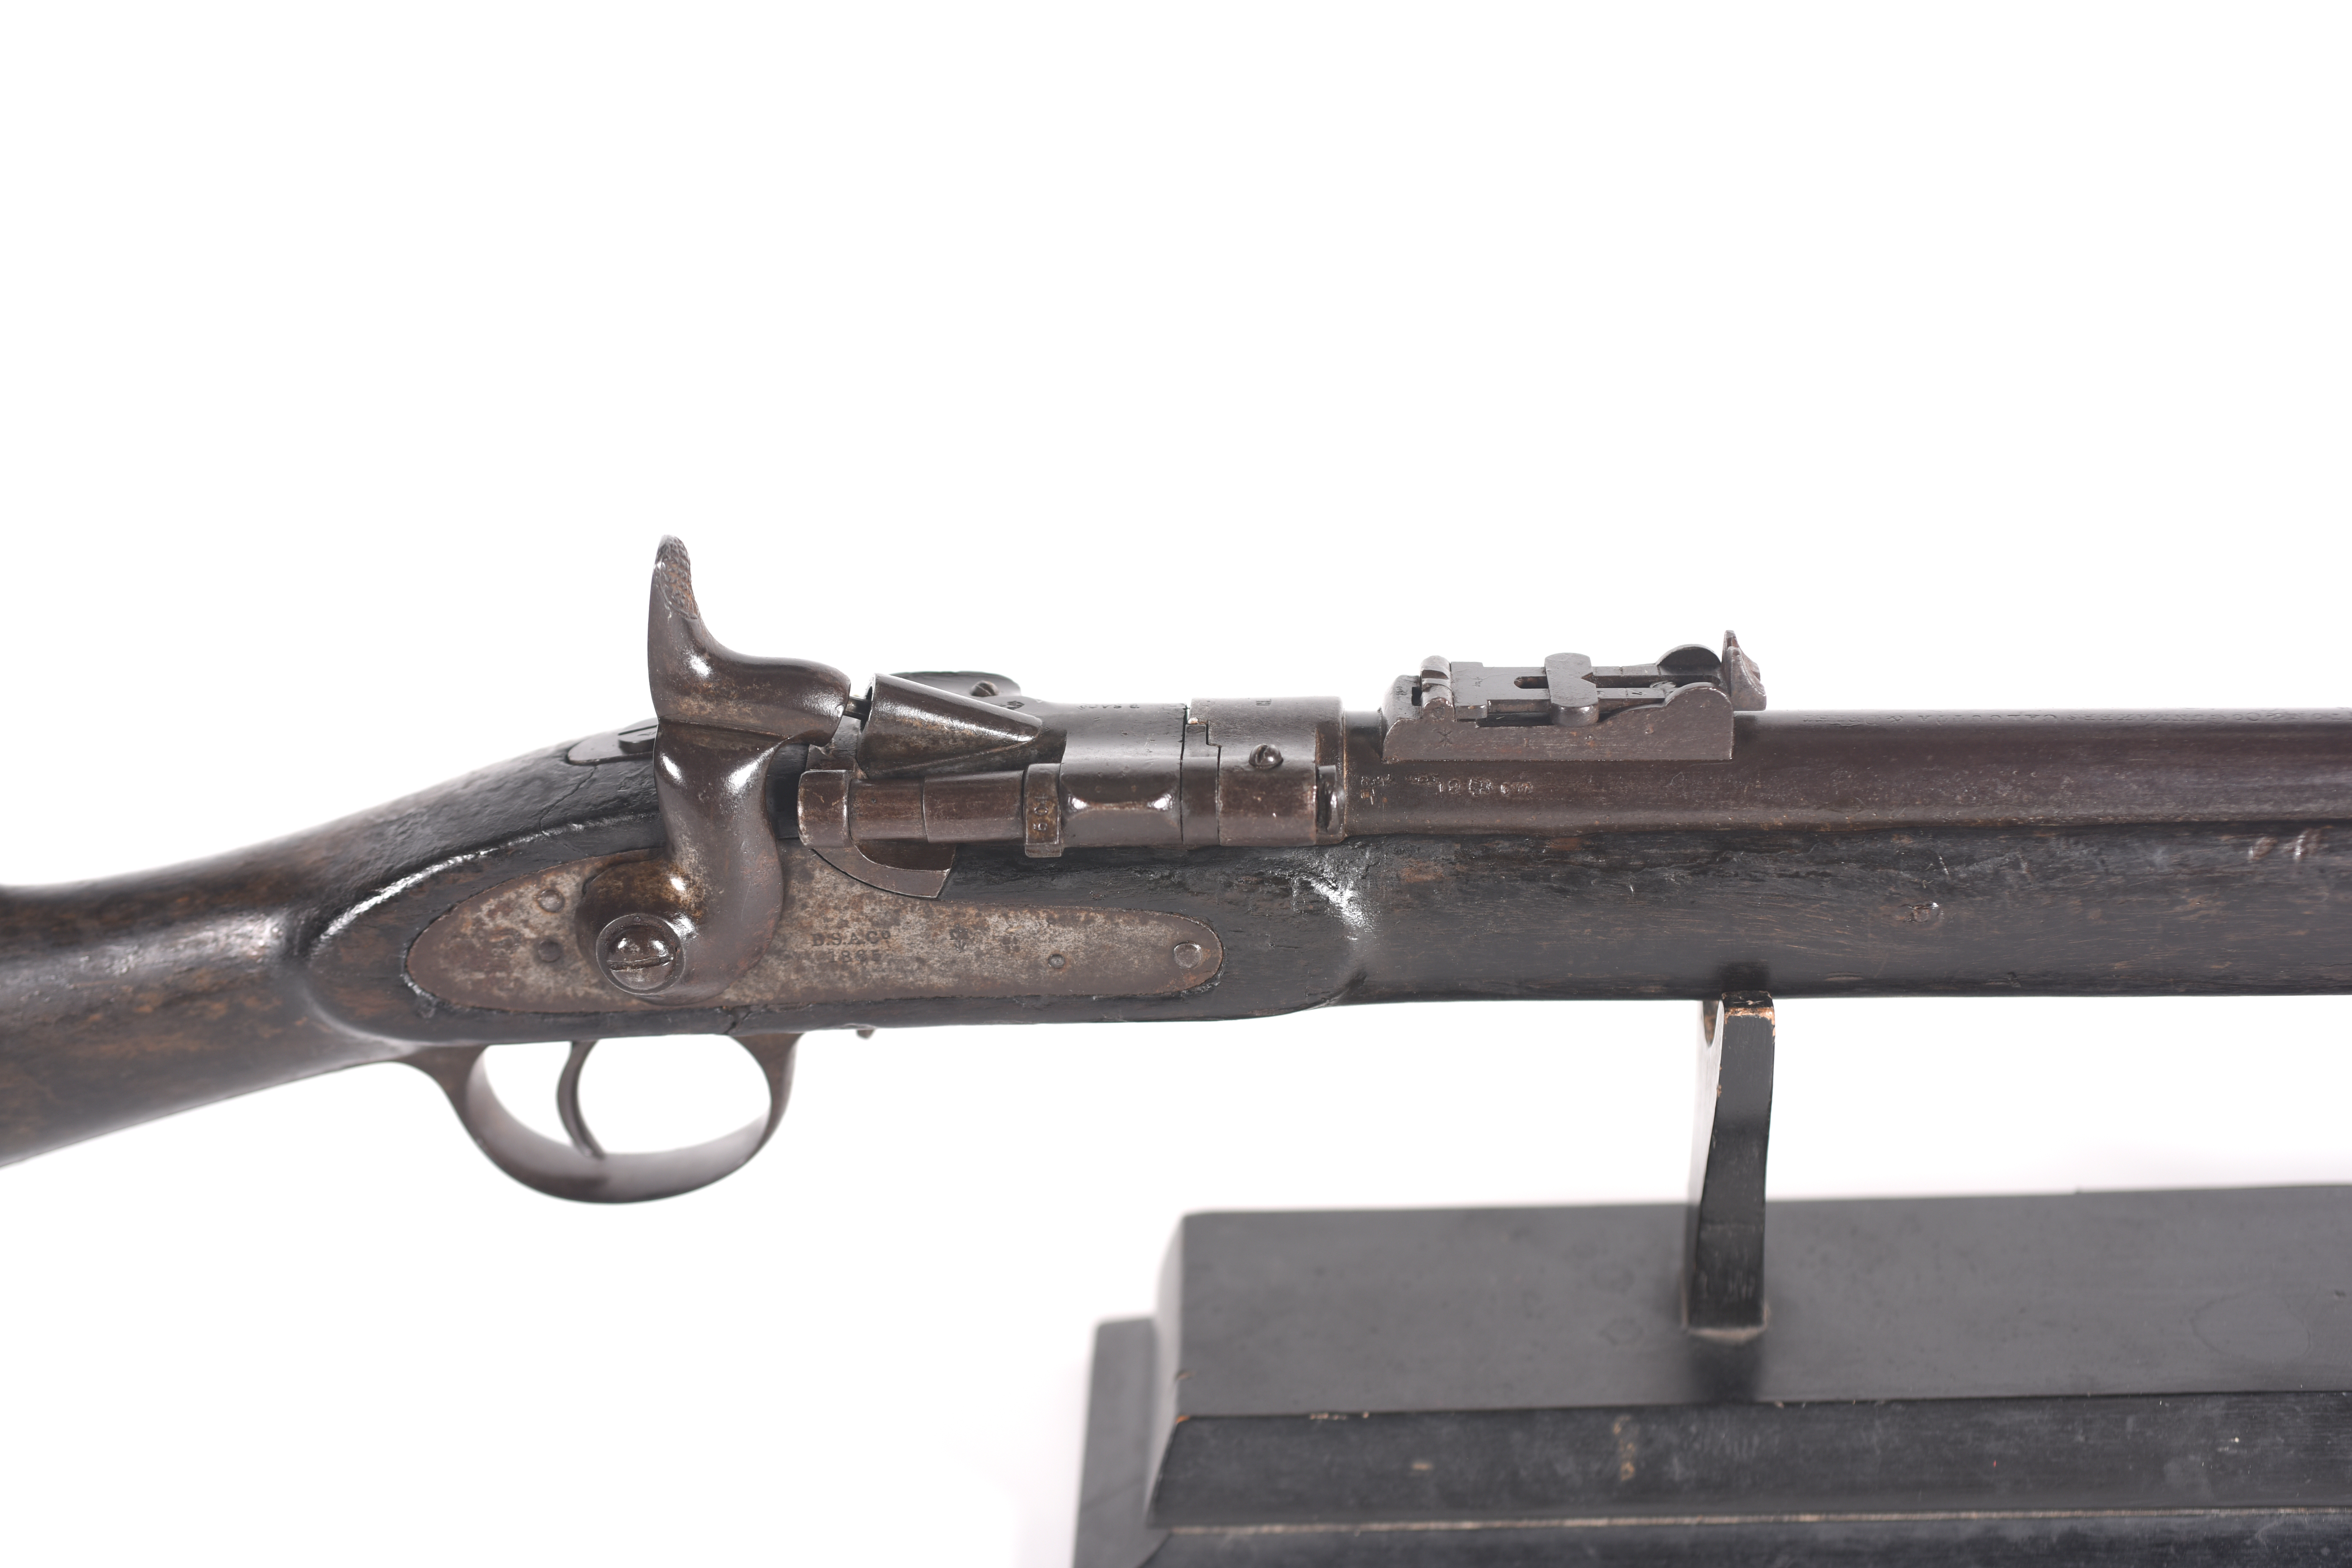 Snider-Enfield rifle